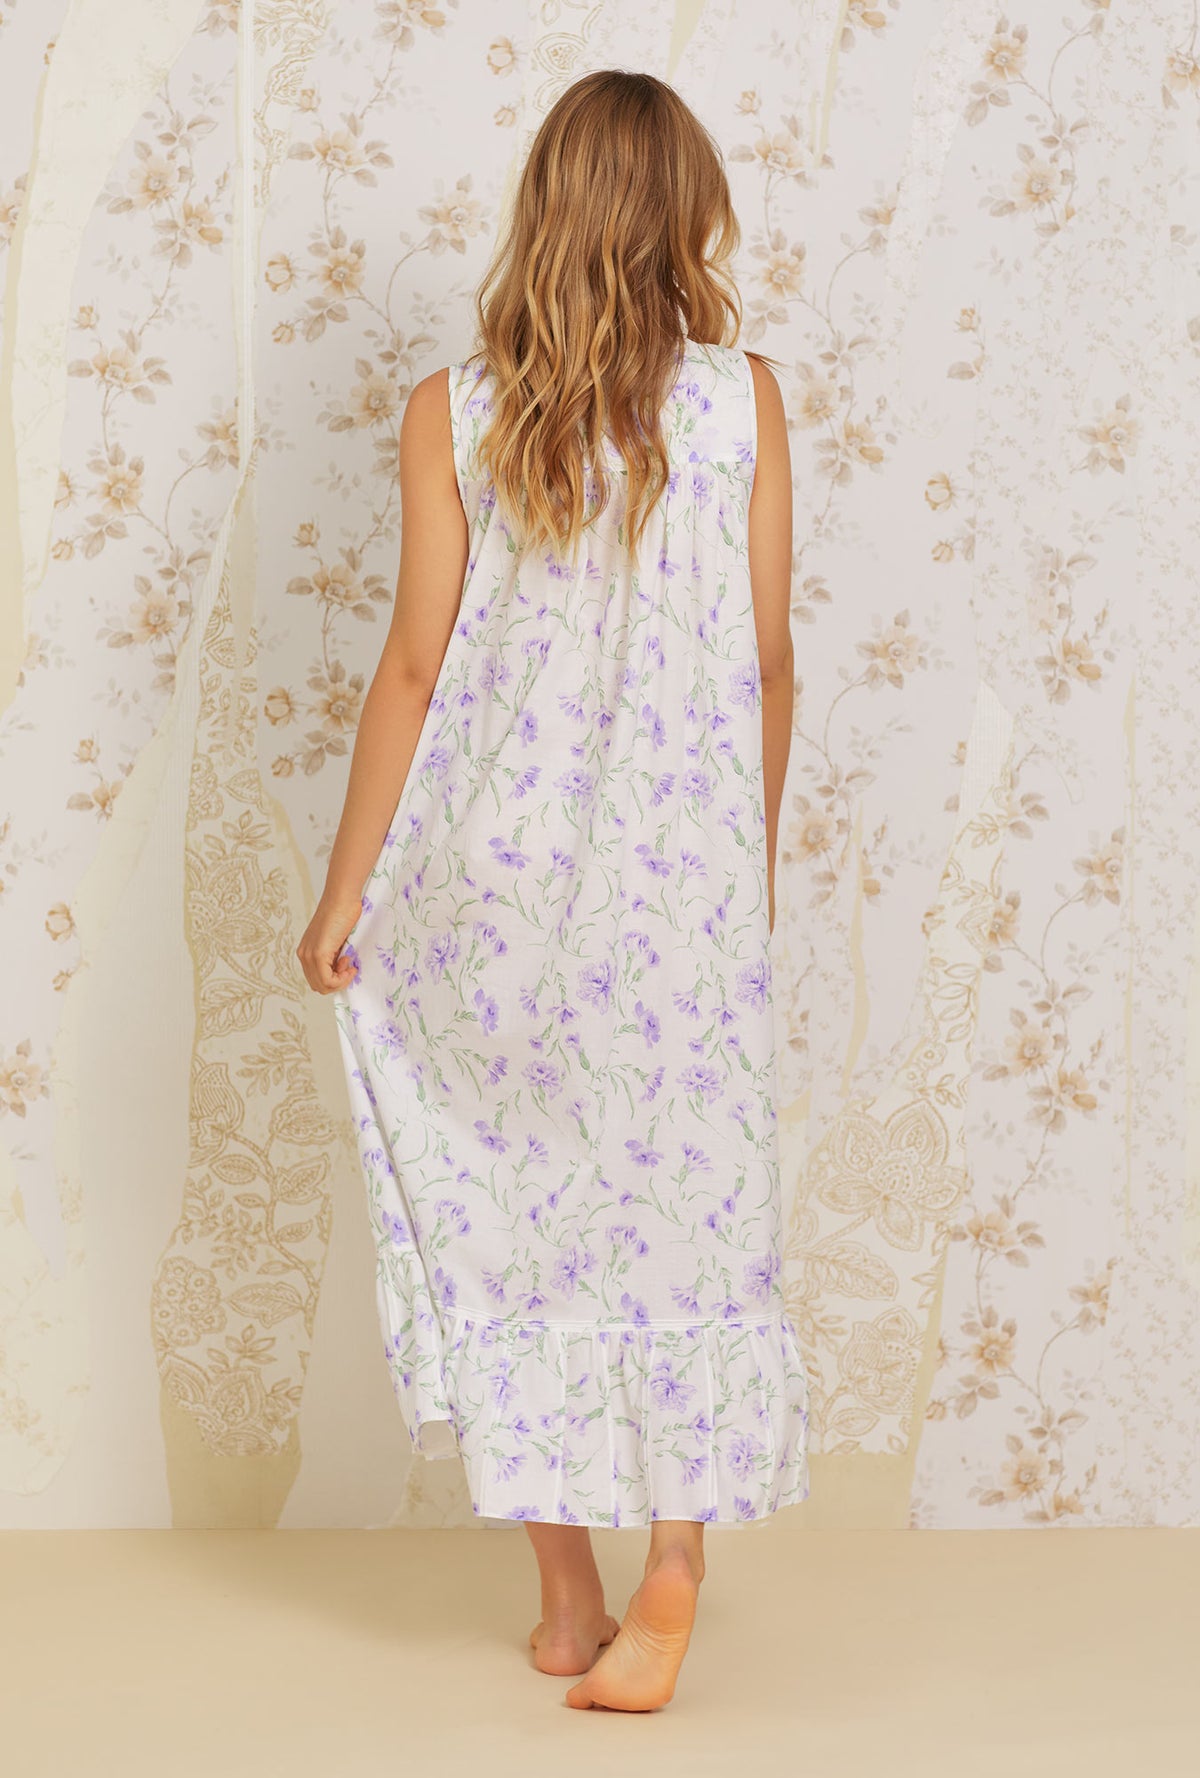 A lady wearing white  sleeveless  Cotton Nightgown with Lilac Carnation  print